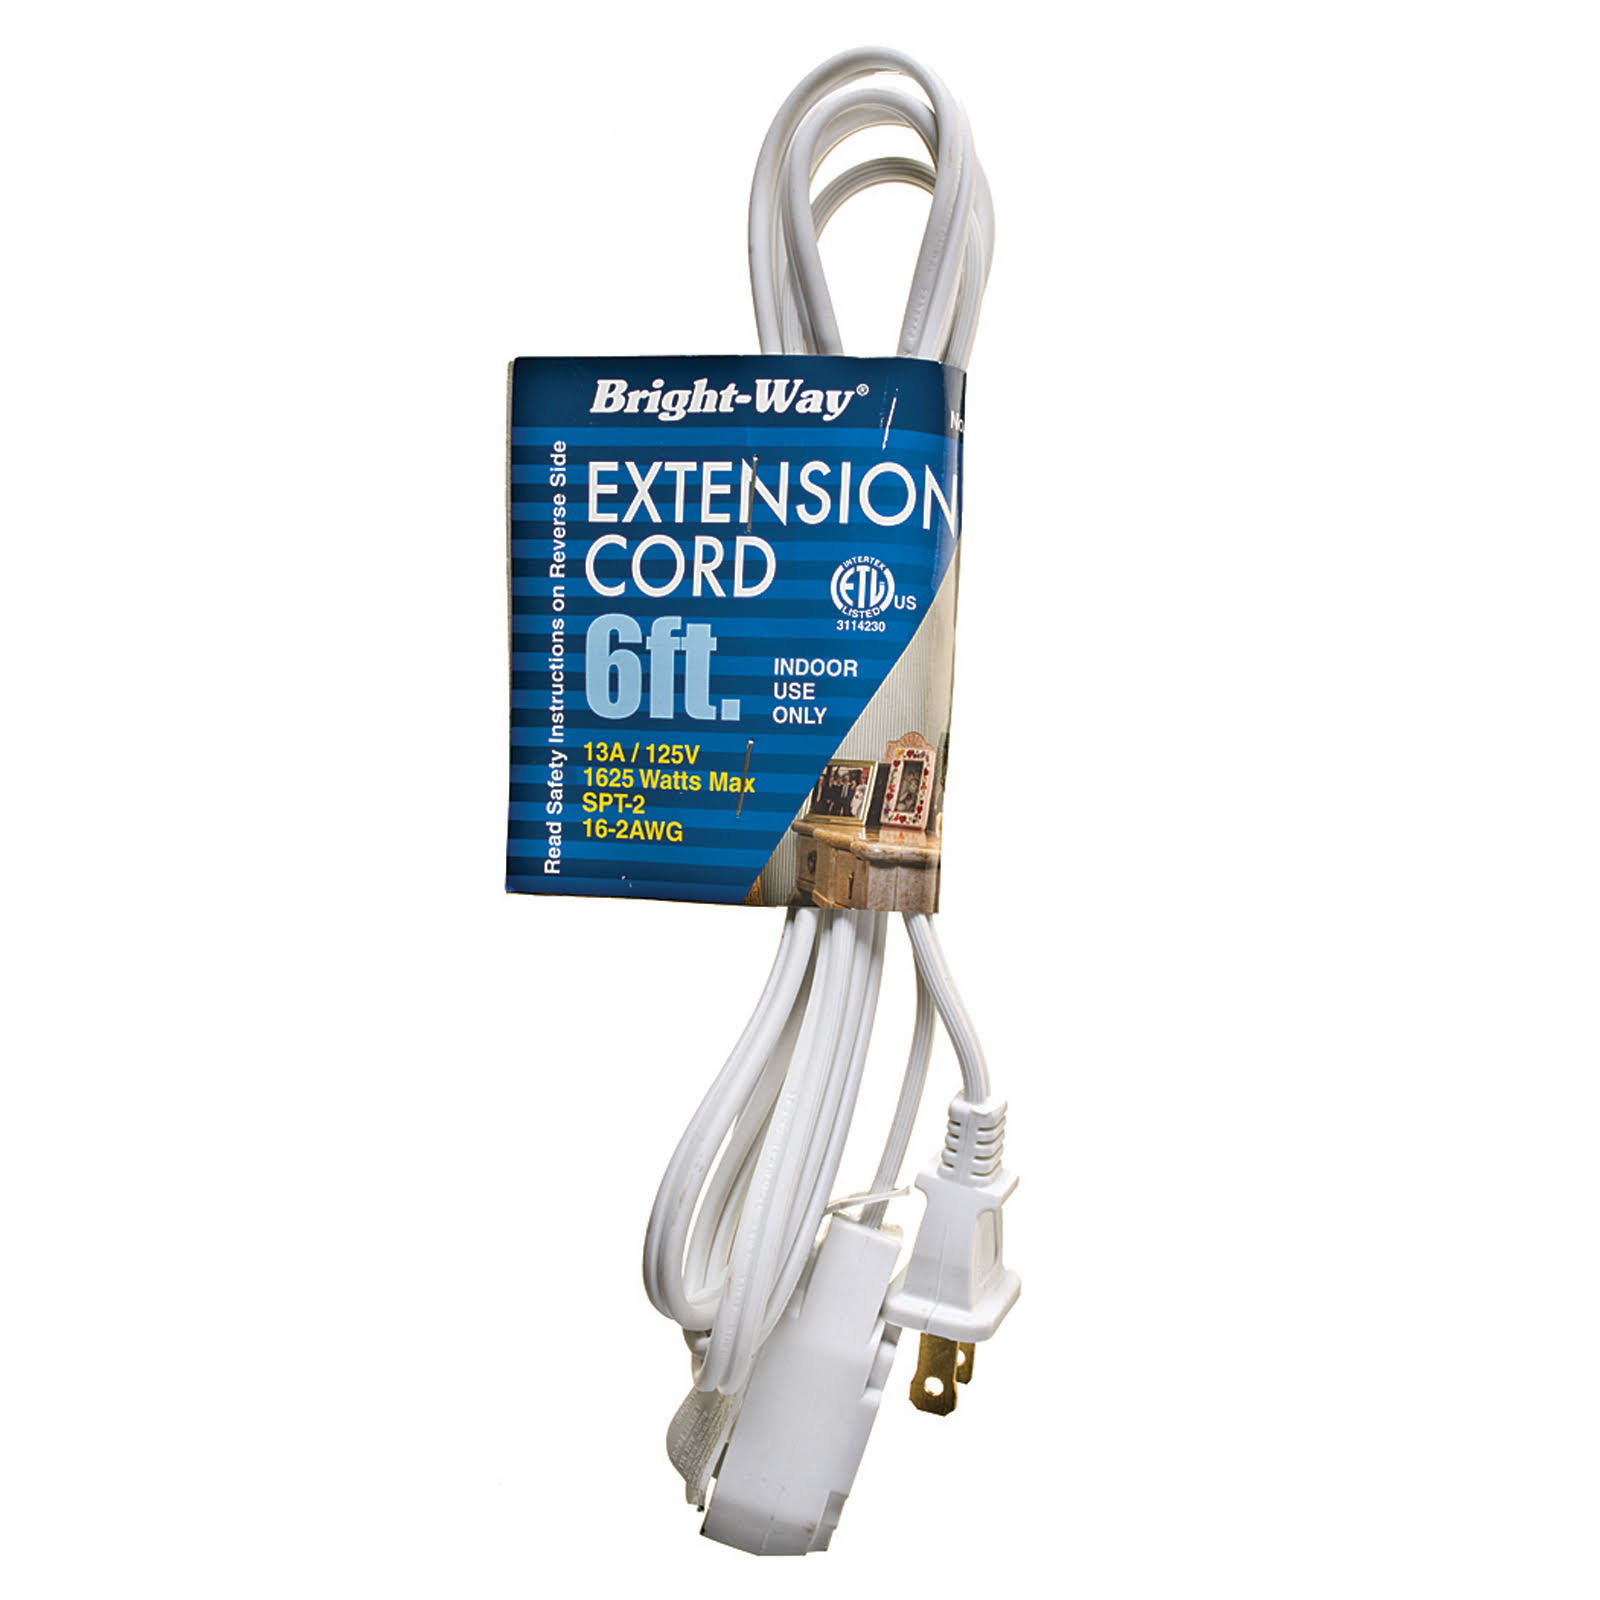 Bright-way Household Extension Cord - White, 6'